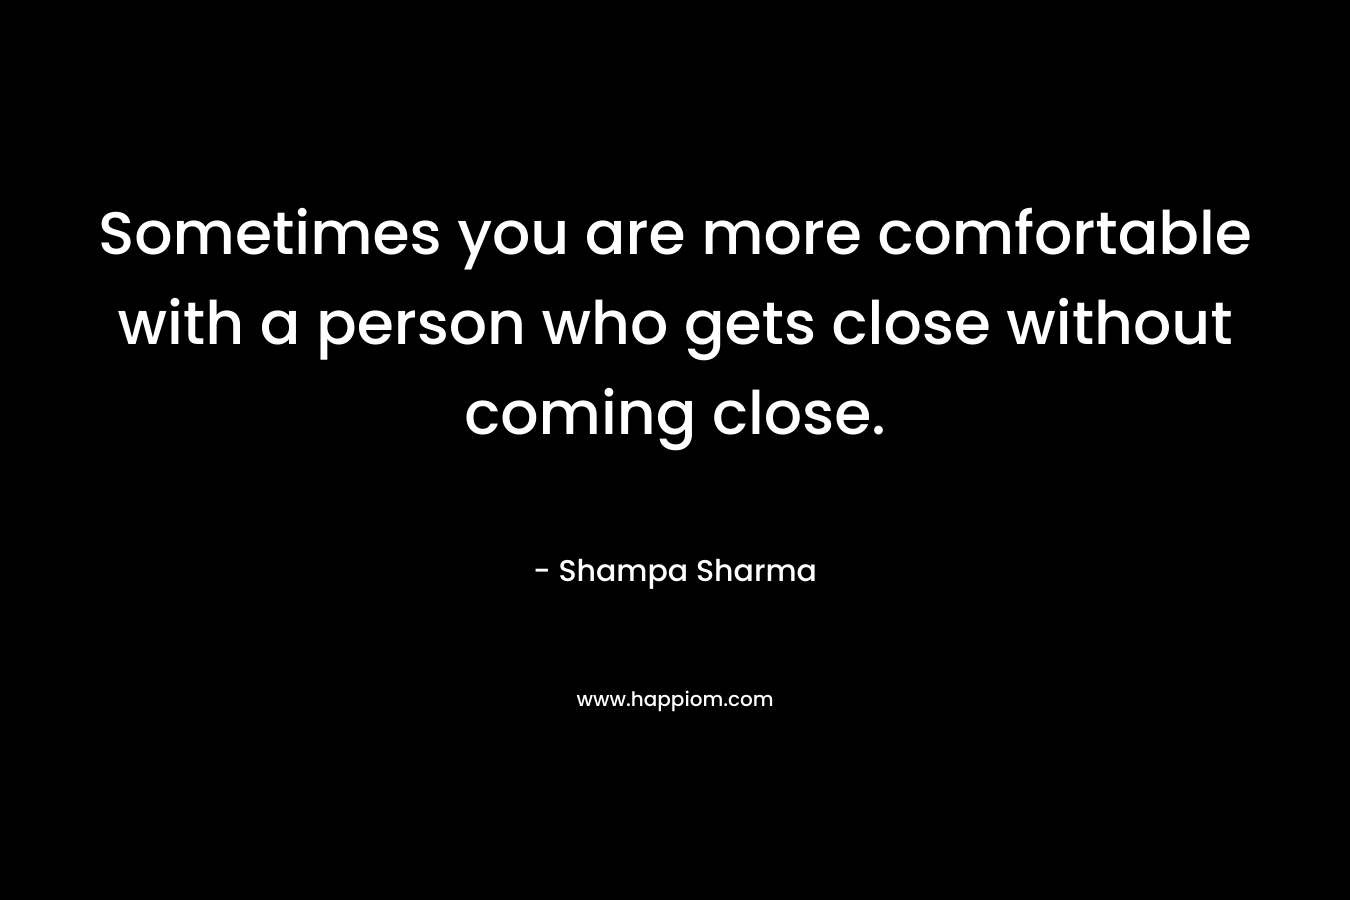 Sometimes you are more comfortable with a person who gets close without coming close. – Shampa Sharma